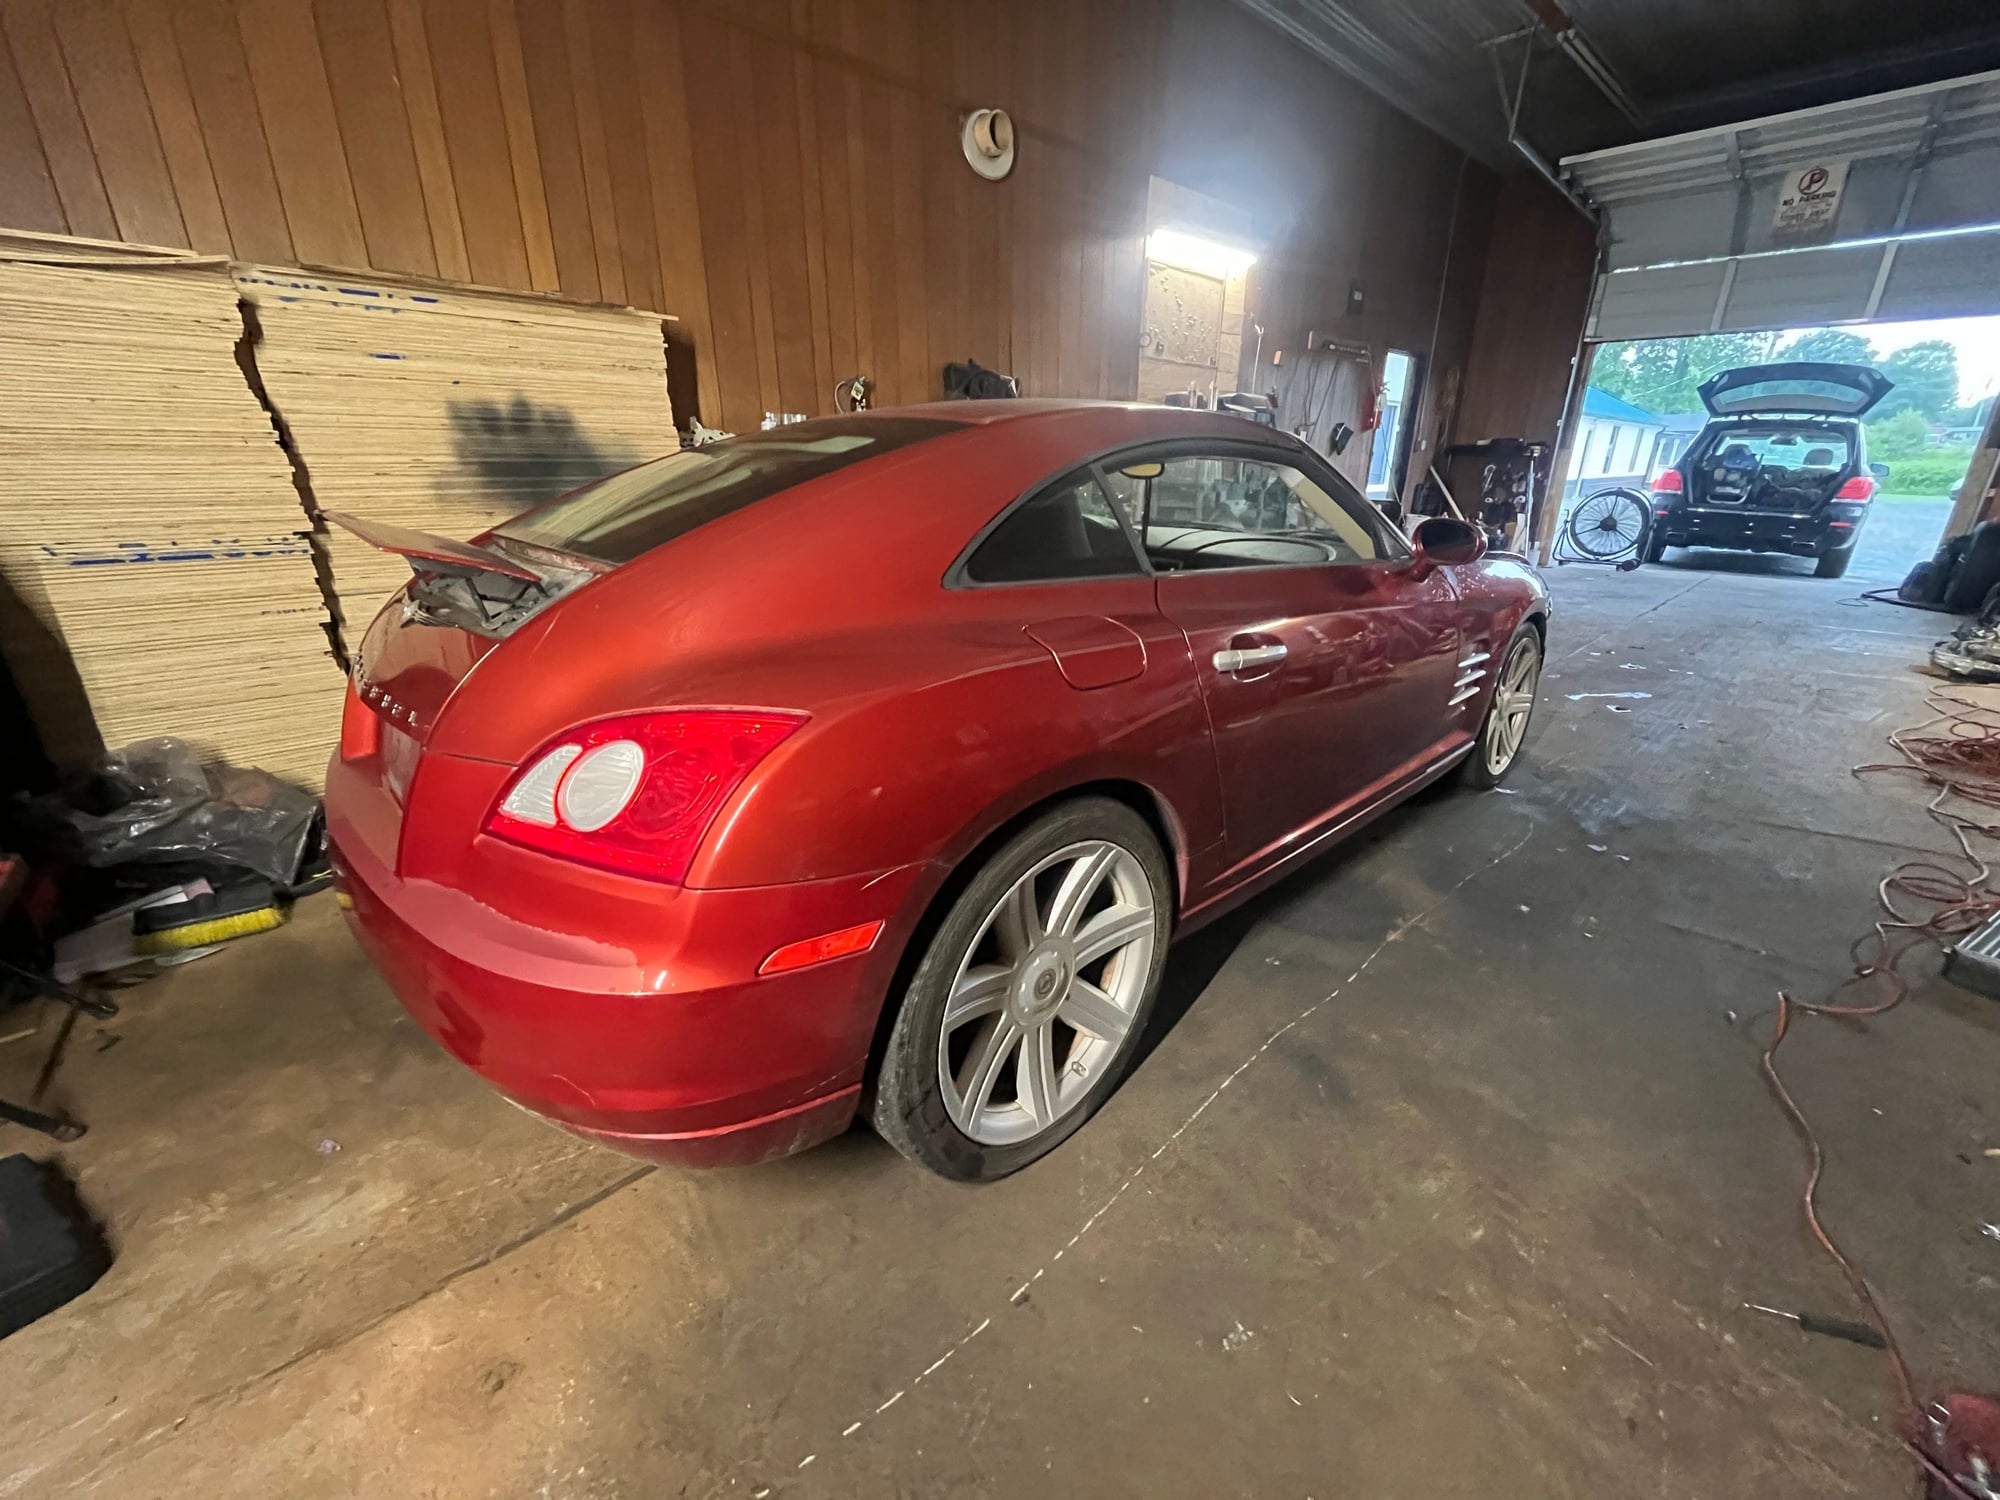 Drivetrain - Parts car whole or part out - Used - 2004 to 2008 Chrysler Crossfire - 2004 to 2008 Chrysler Crossfire - East Bend, NC 27018, United States